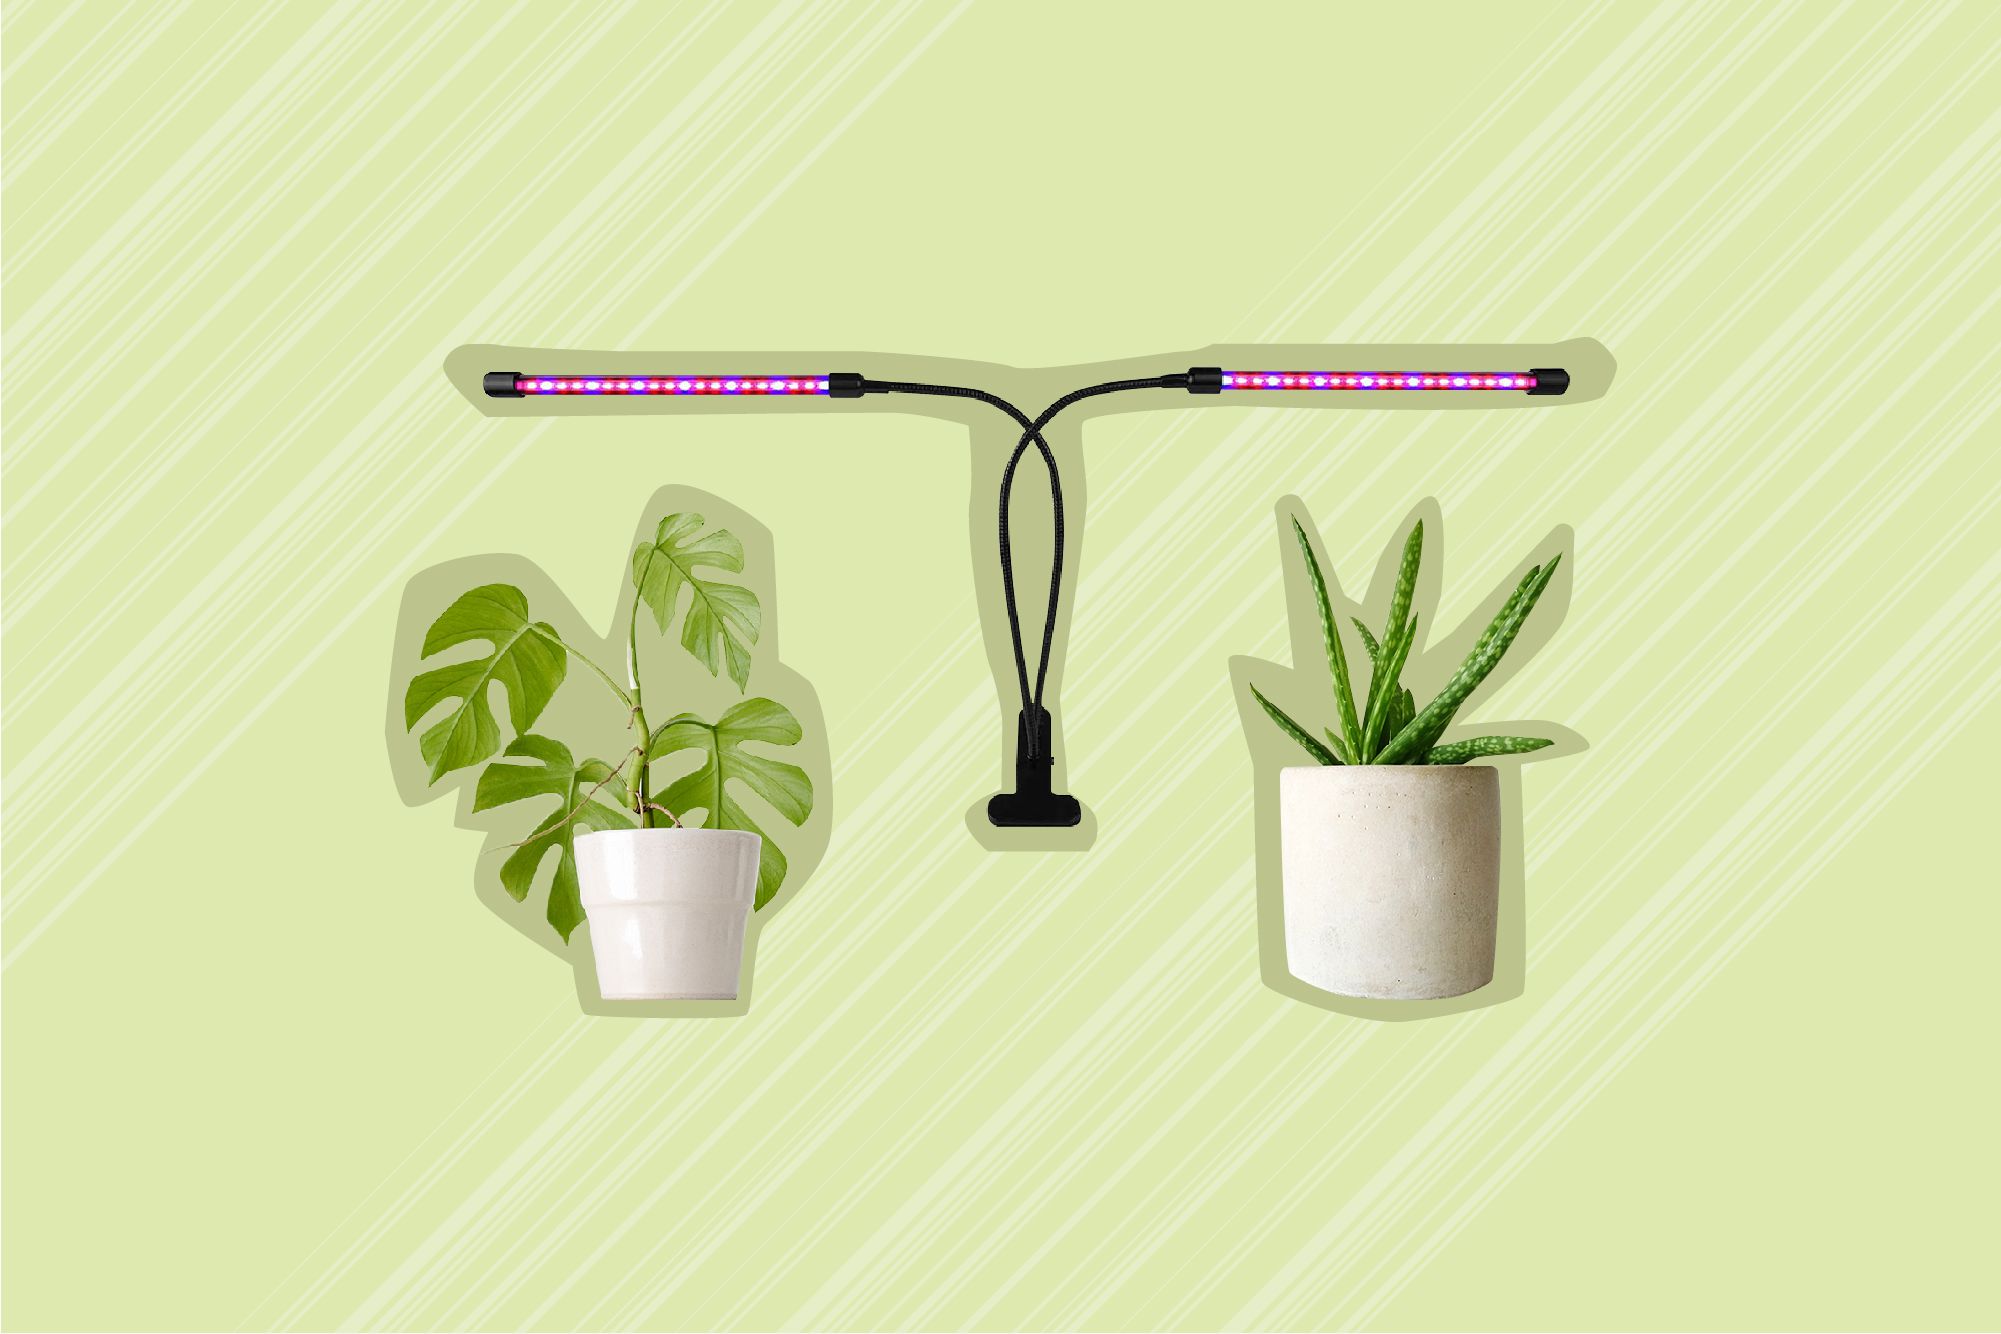 Mimic the Suns Rays With Our Favorite Grow Lights